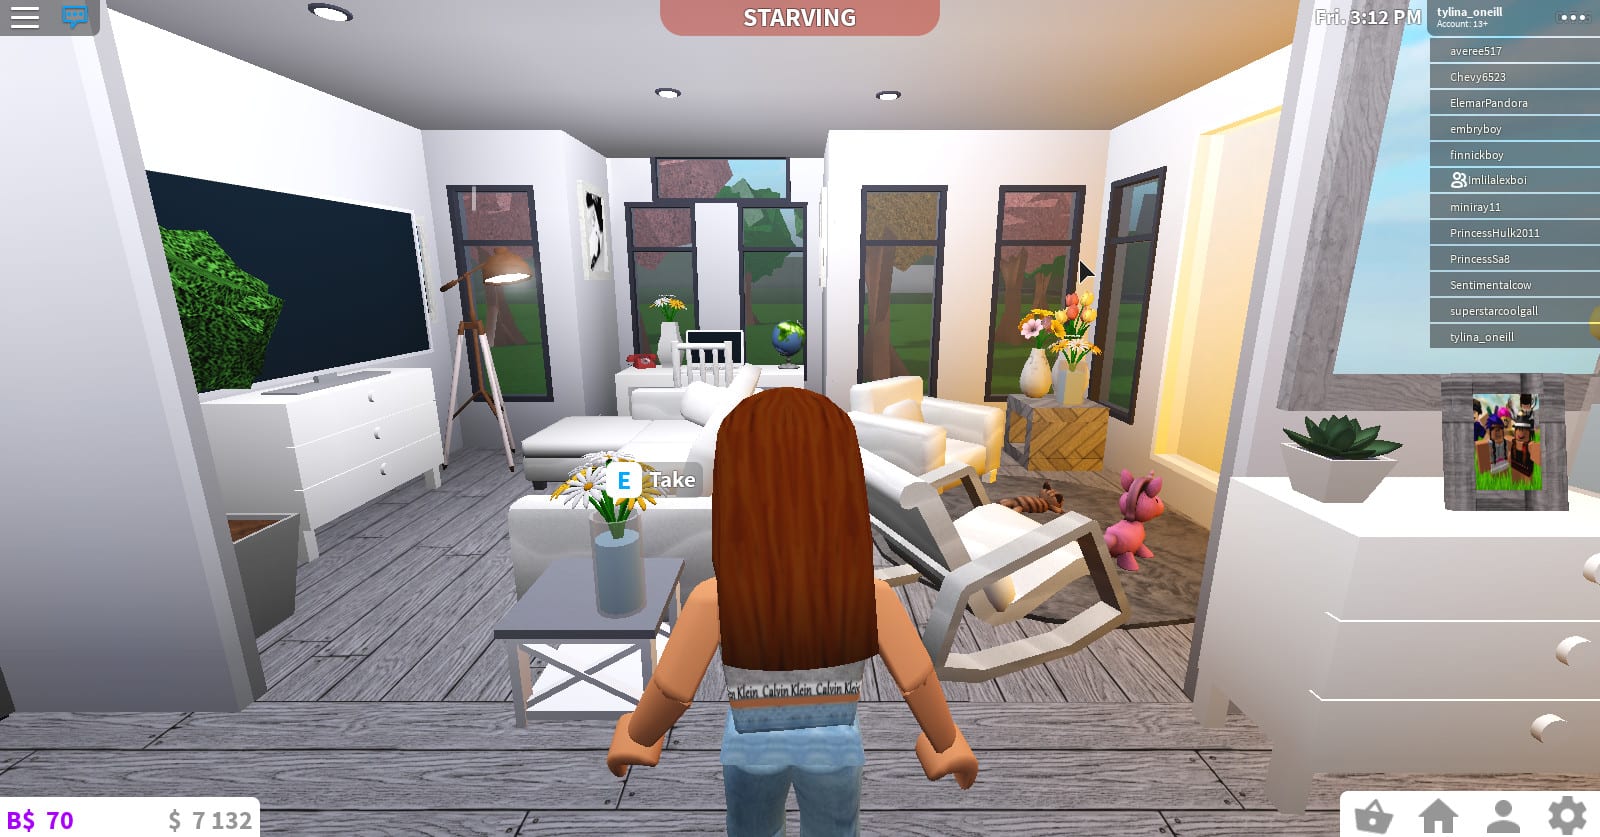 Roblox Bloxburg Builder I Can Build Cafe Hotel Towns Apartments By